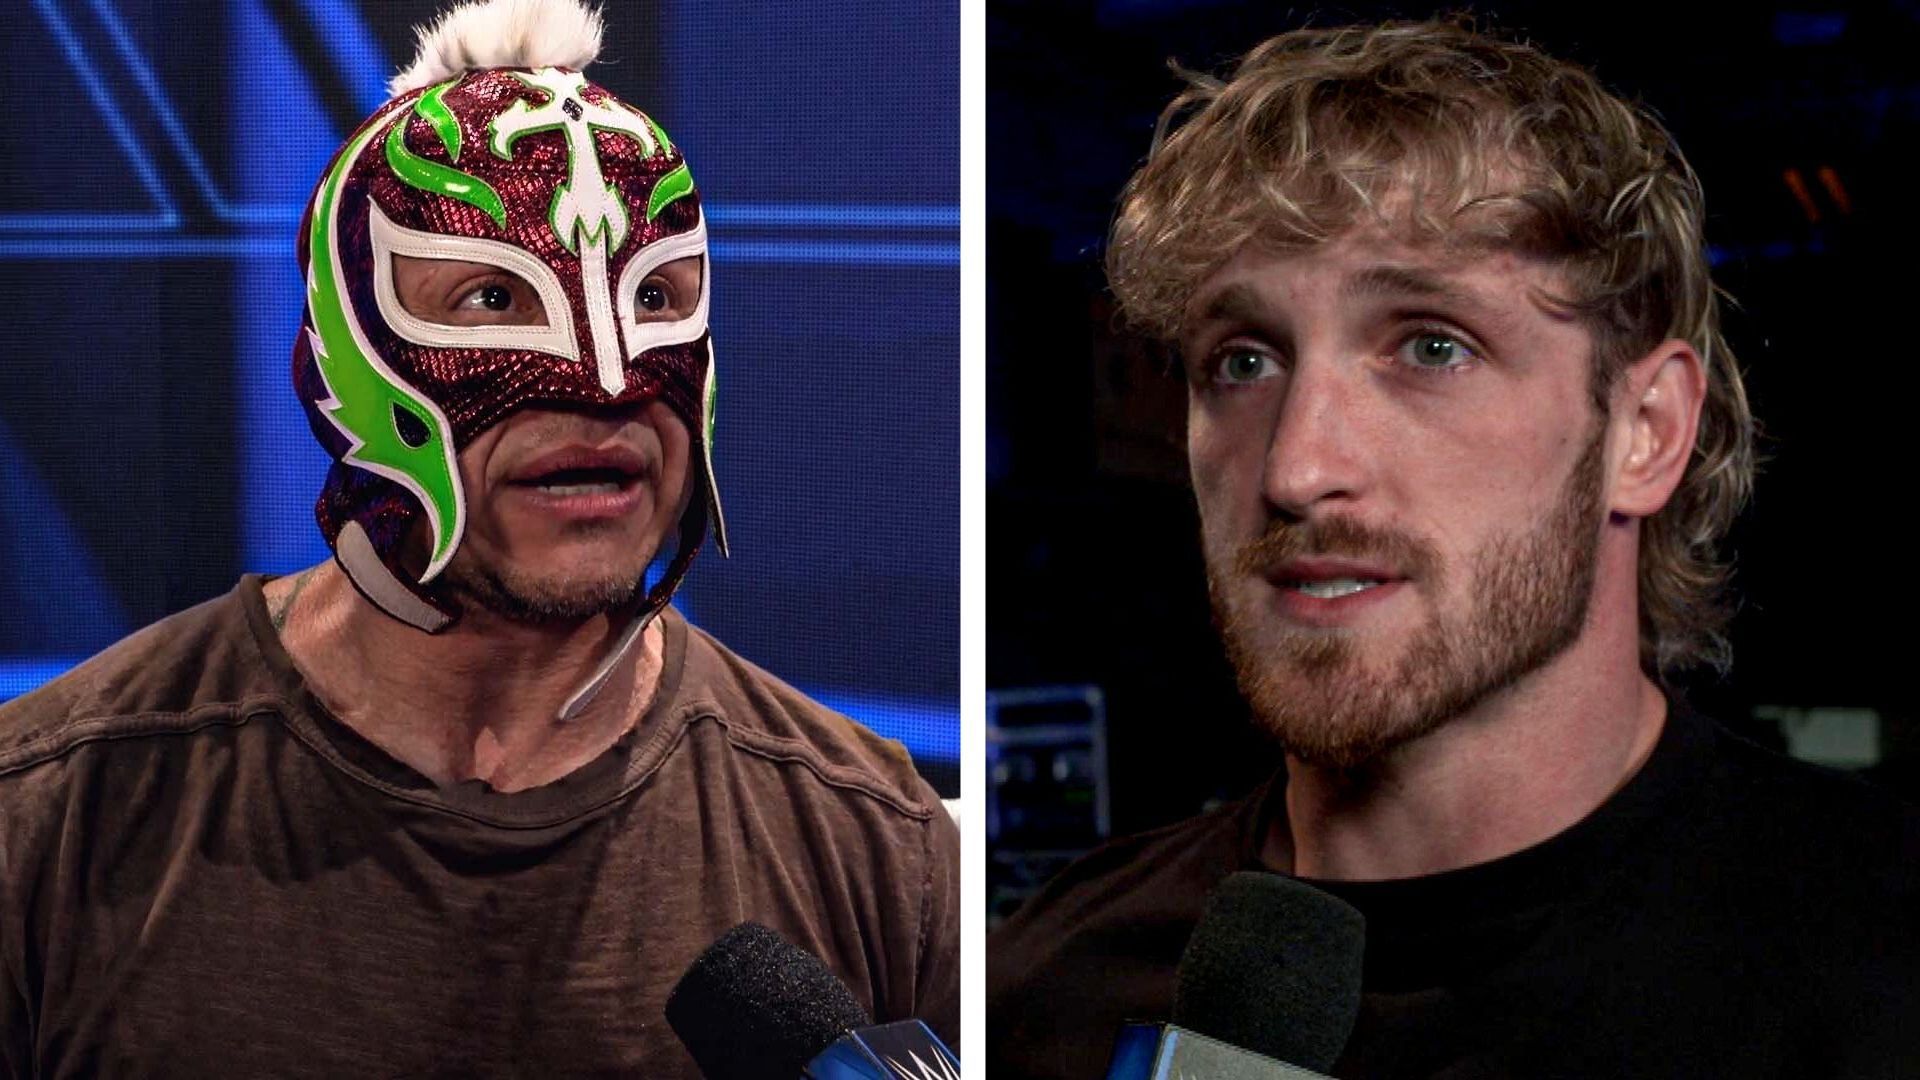 Rey Mysterio and Logan Paul have a special segment on WWE SmackDown